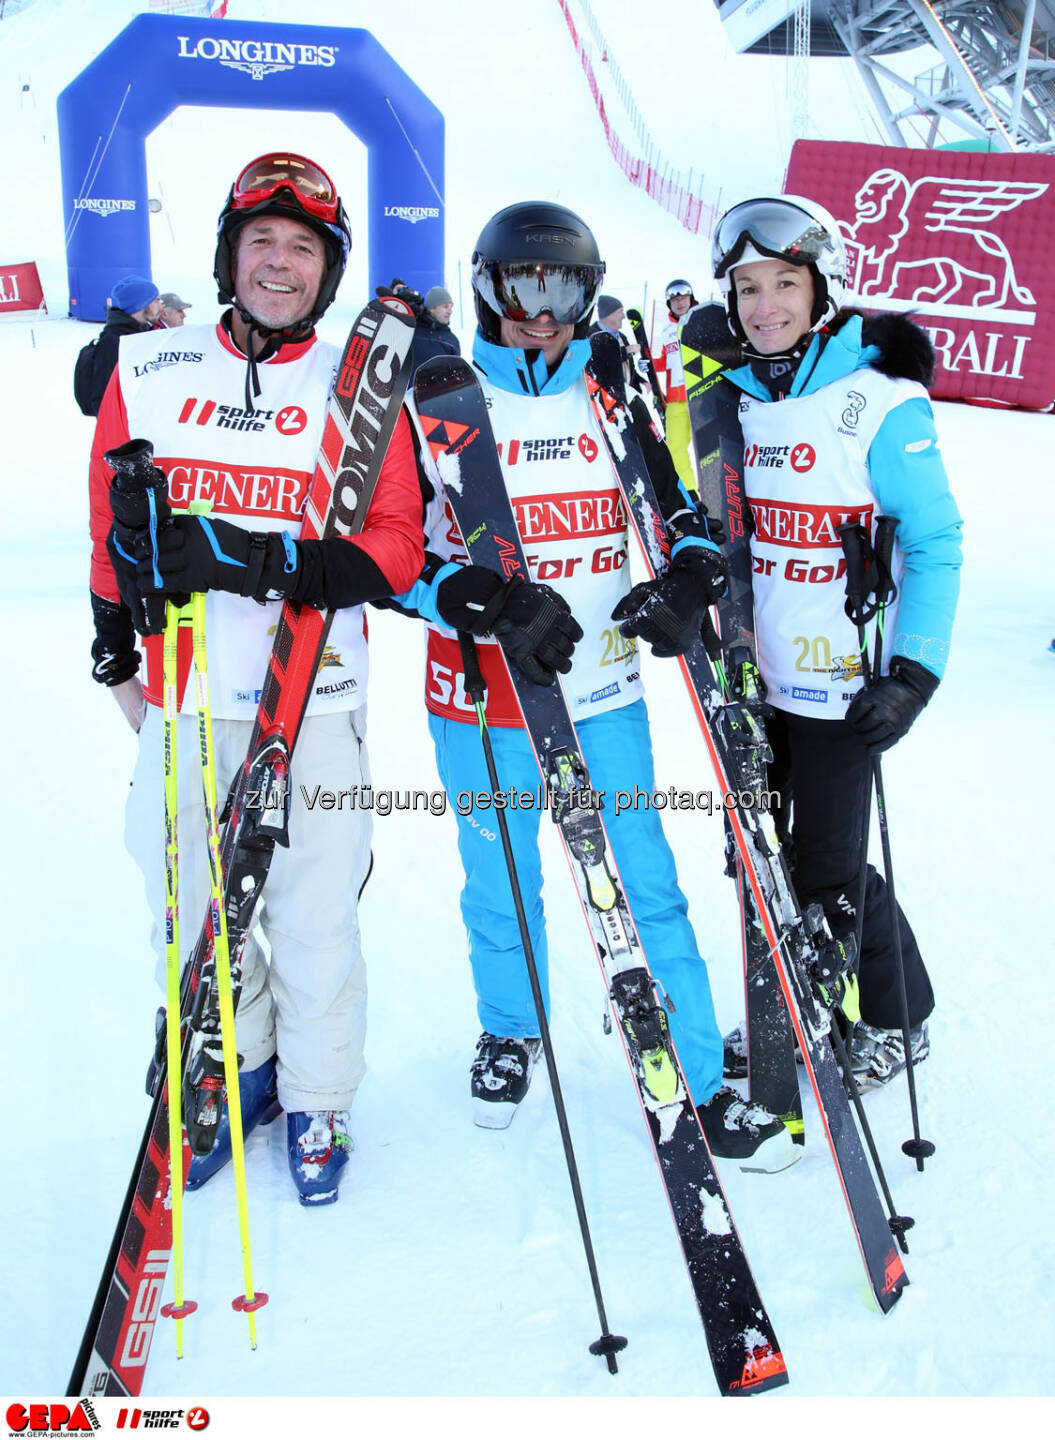 Ski for Gold Charity Race. Image shows Andreas Grossek, Horst Felbermayr and Andrea Felbermayr. Photo: GEPA pictures/ Harald Steiner